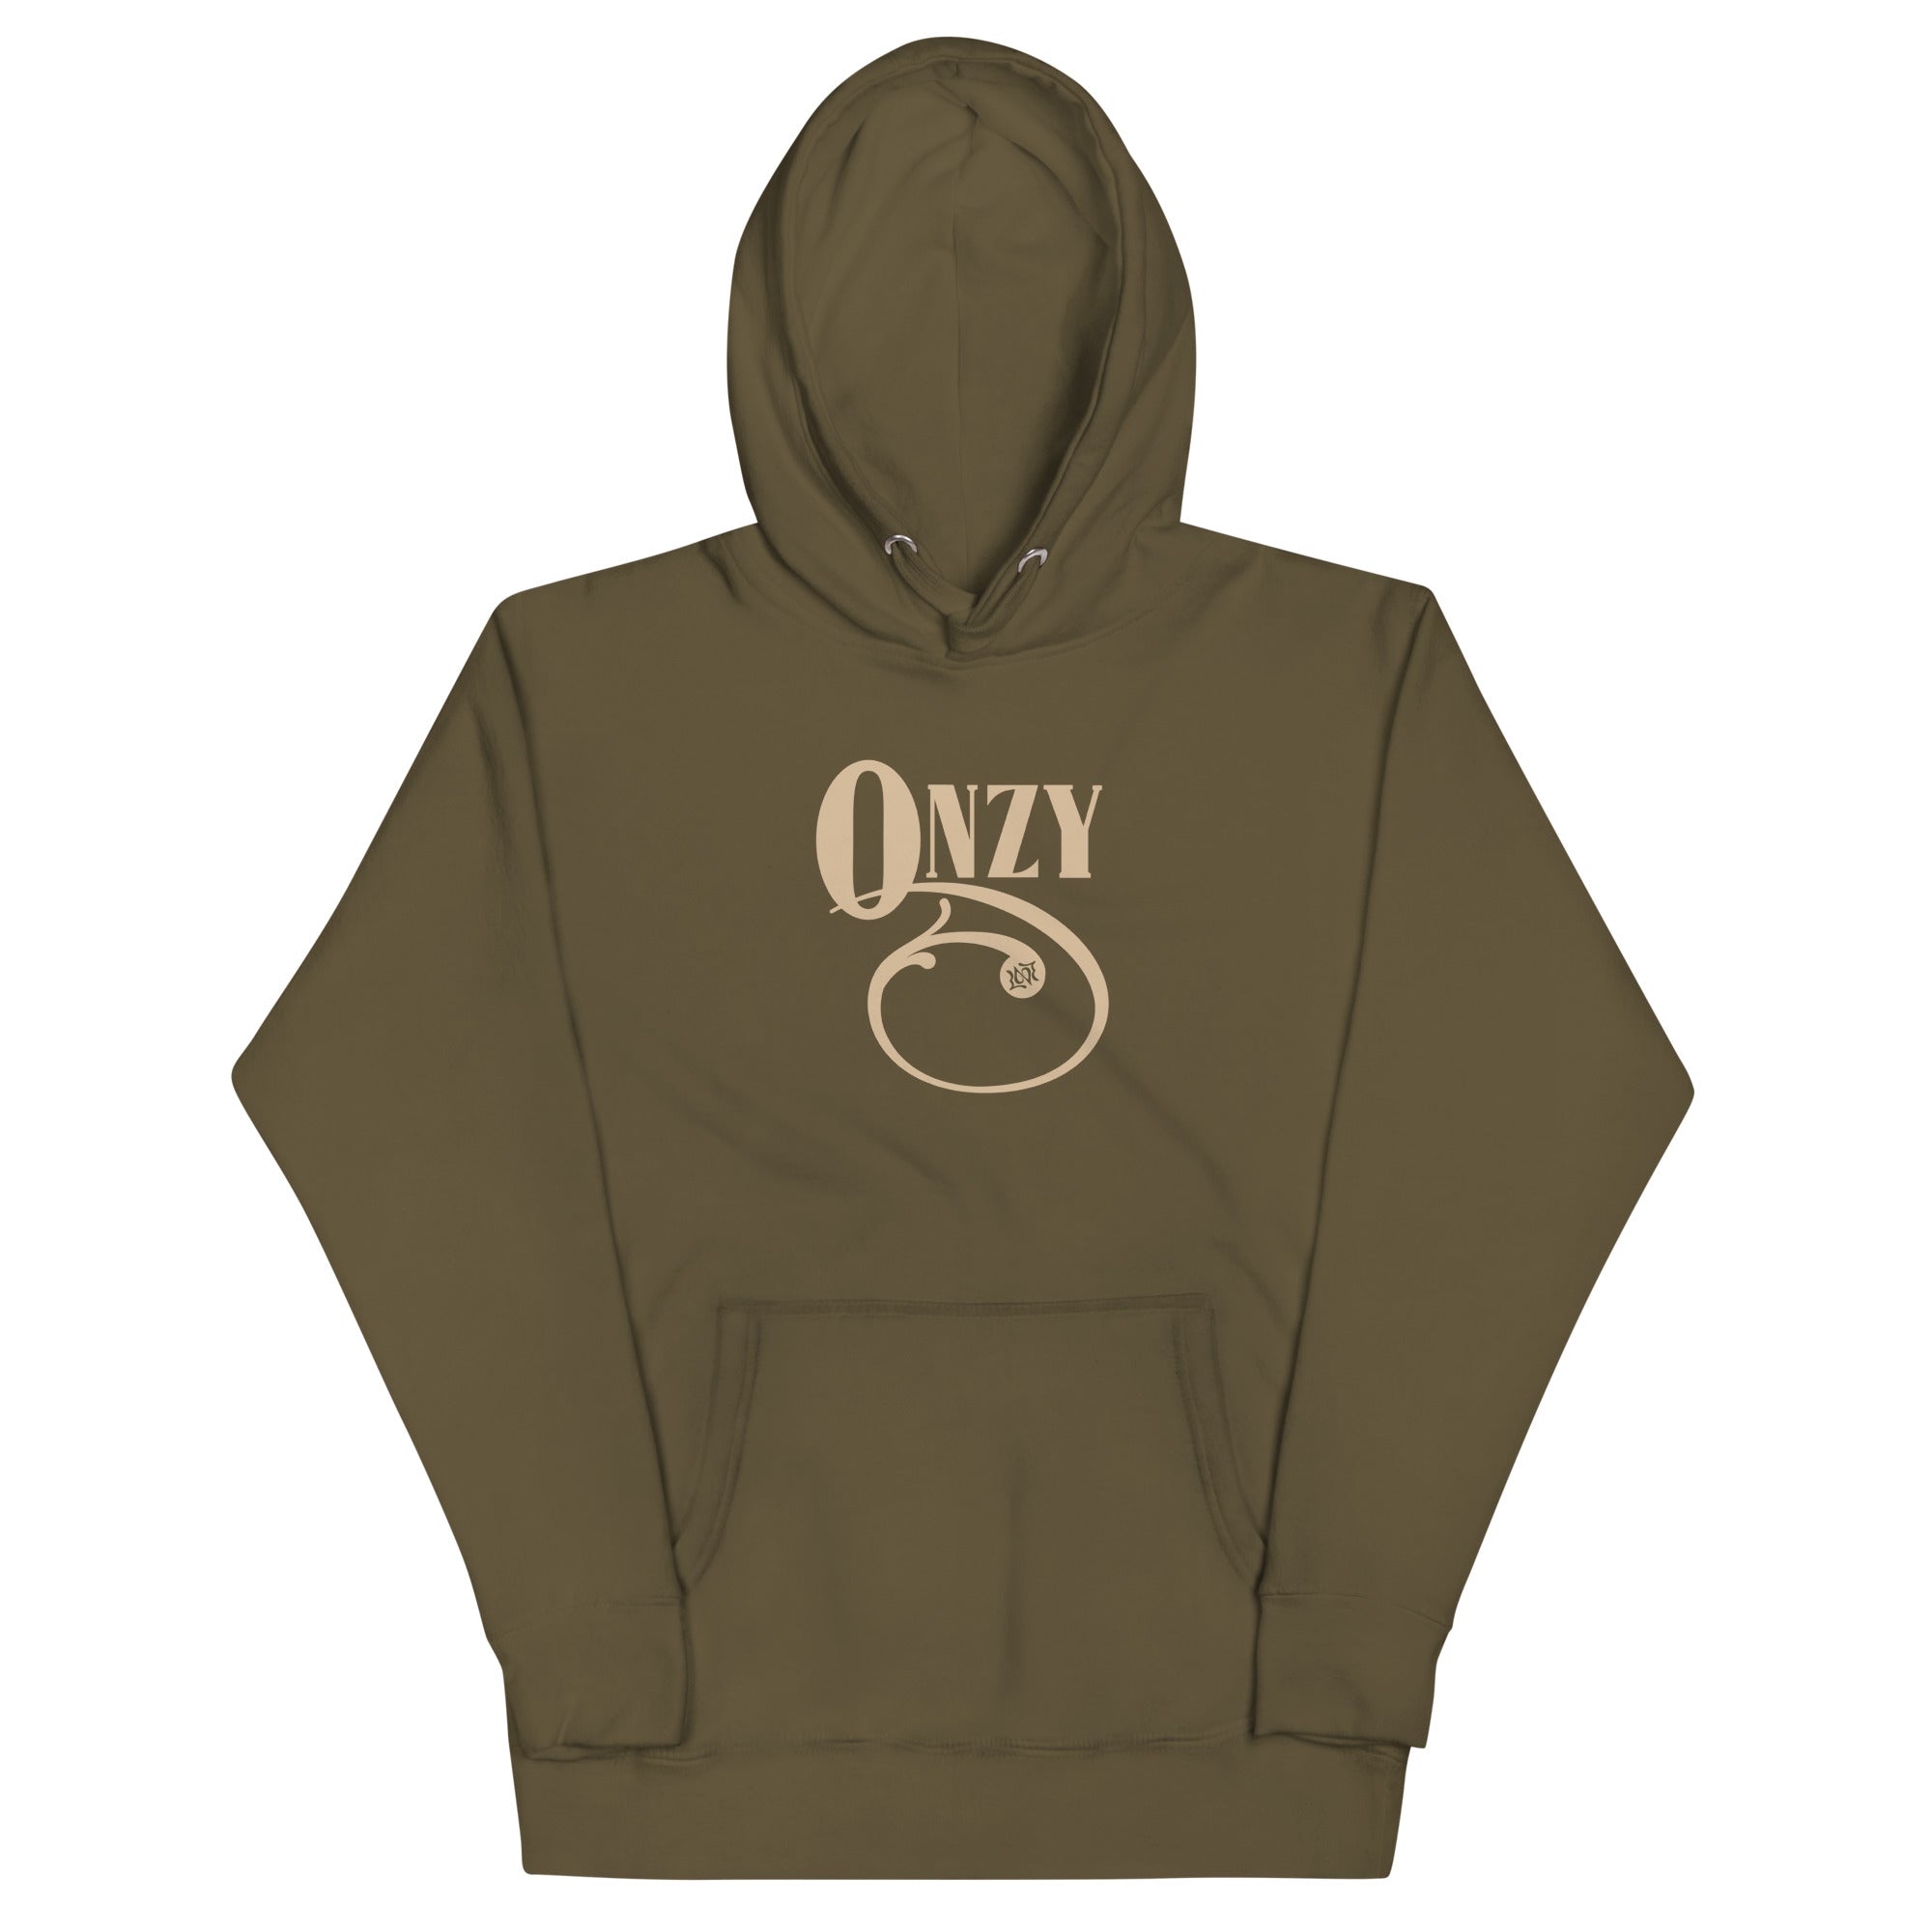 QNZY Welcome Sign, Hoodie